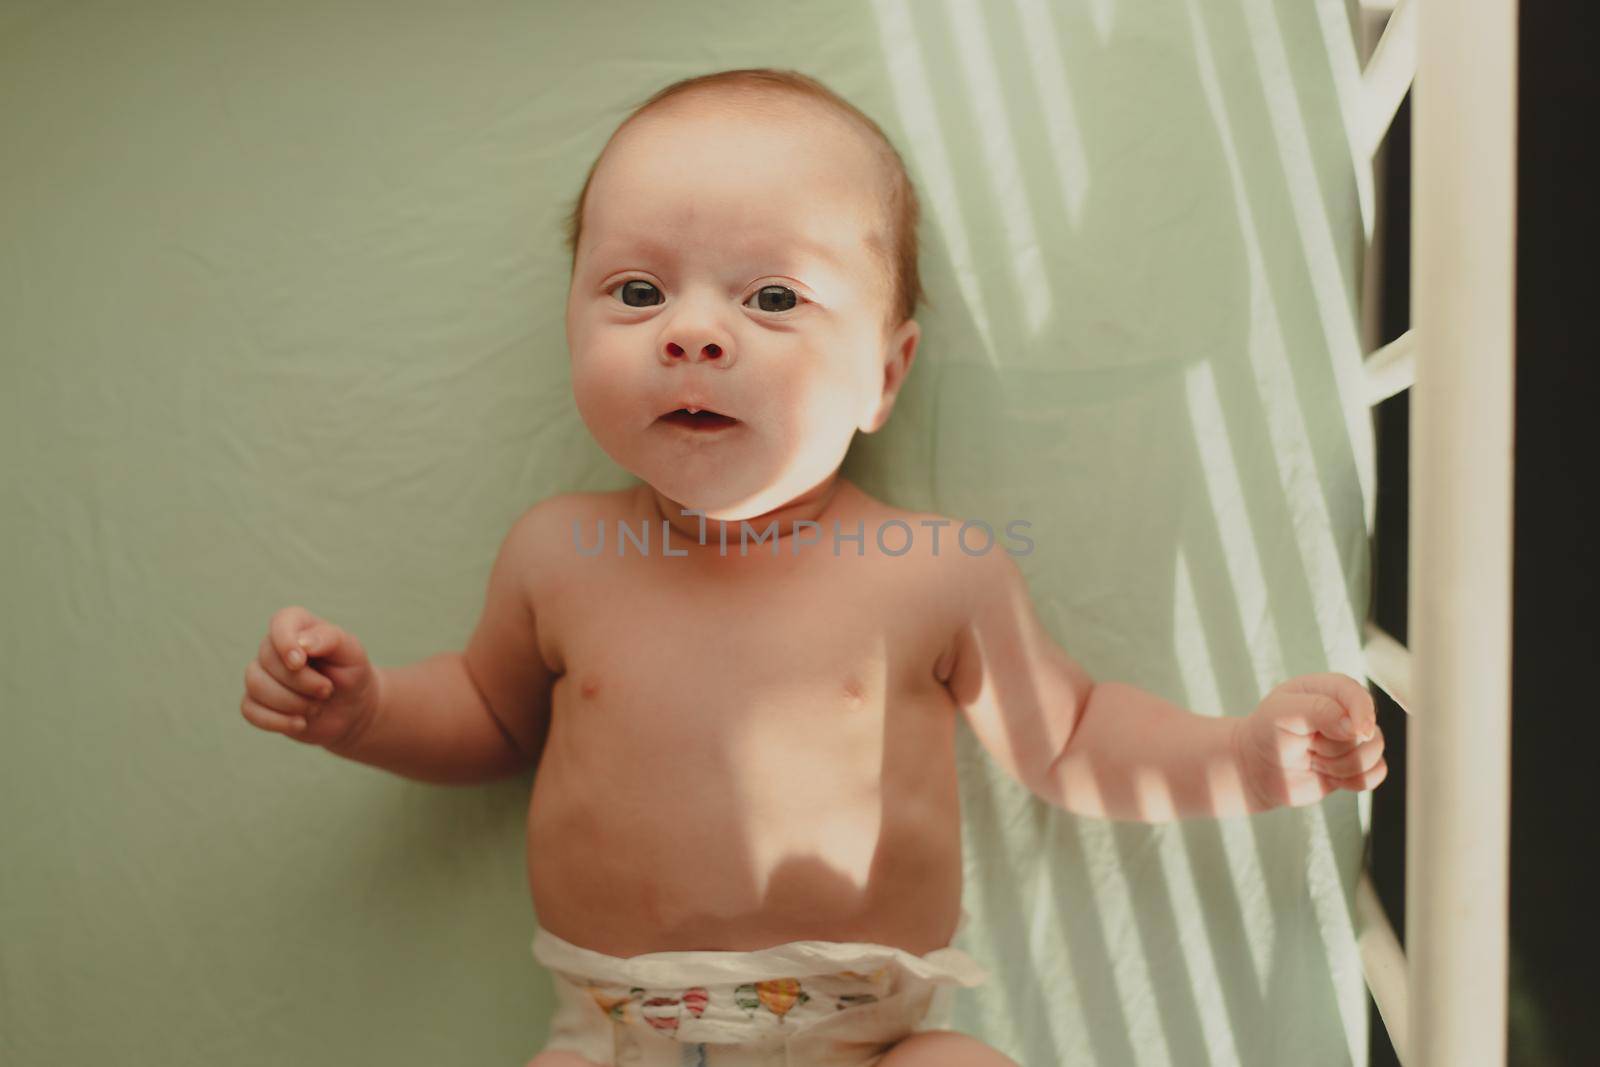 The baby is lying in his crib and looking at the camera . A happy child. Children's article. Copy Space